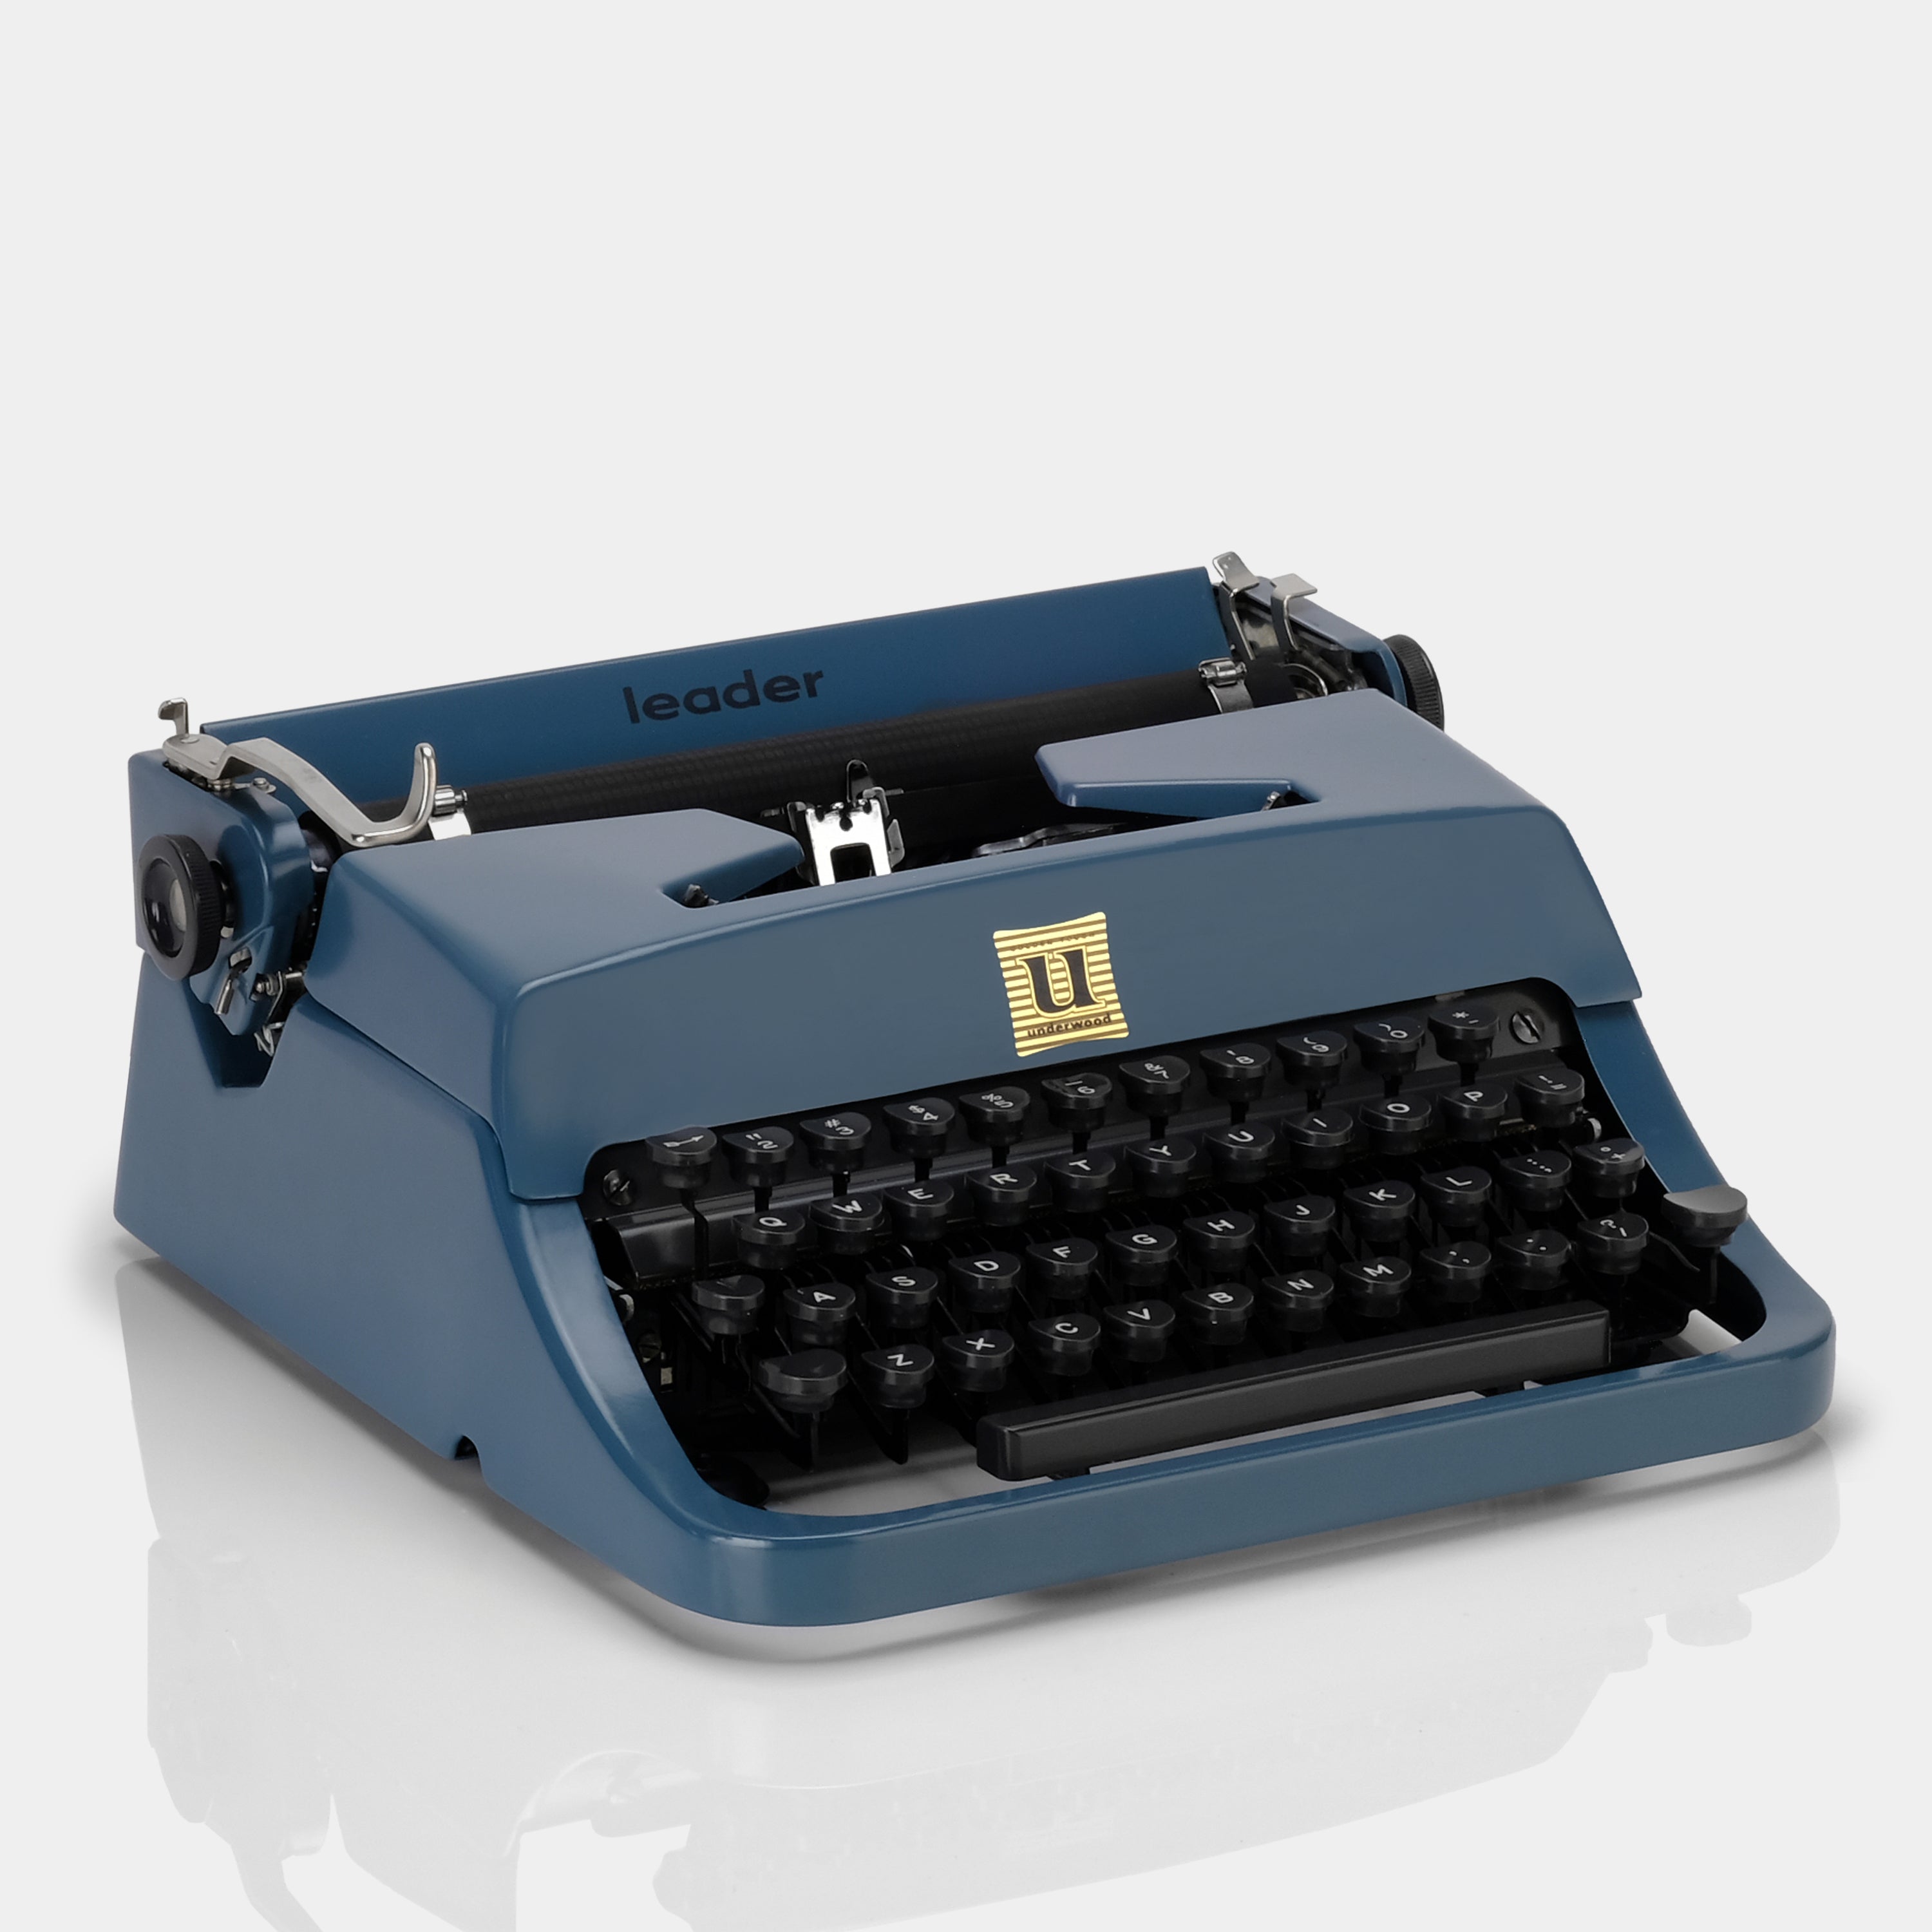 Underwood Leader Golden Touch Blue Manual Typewriter and Case